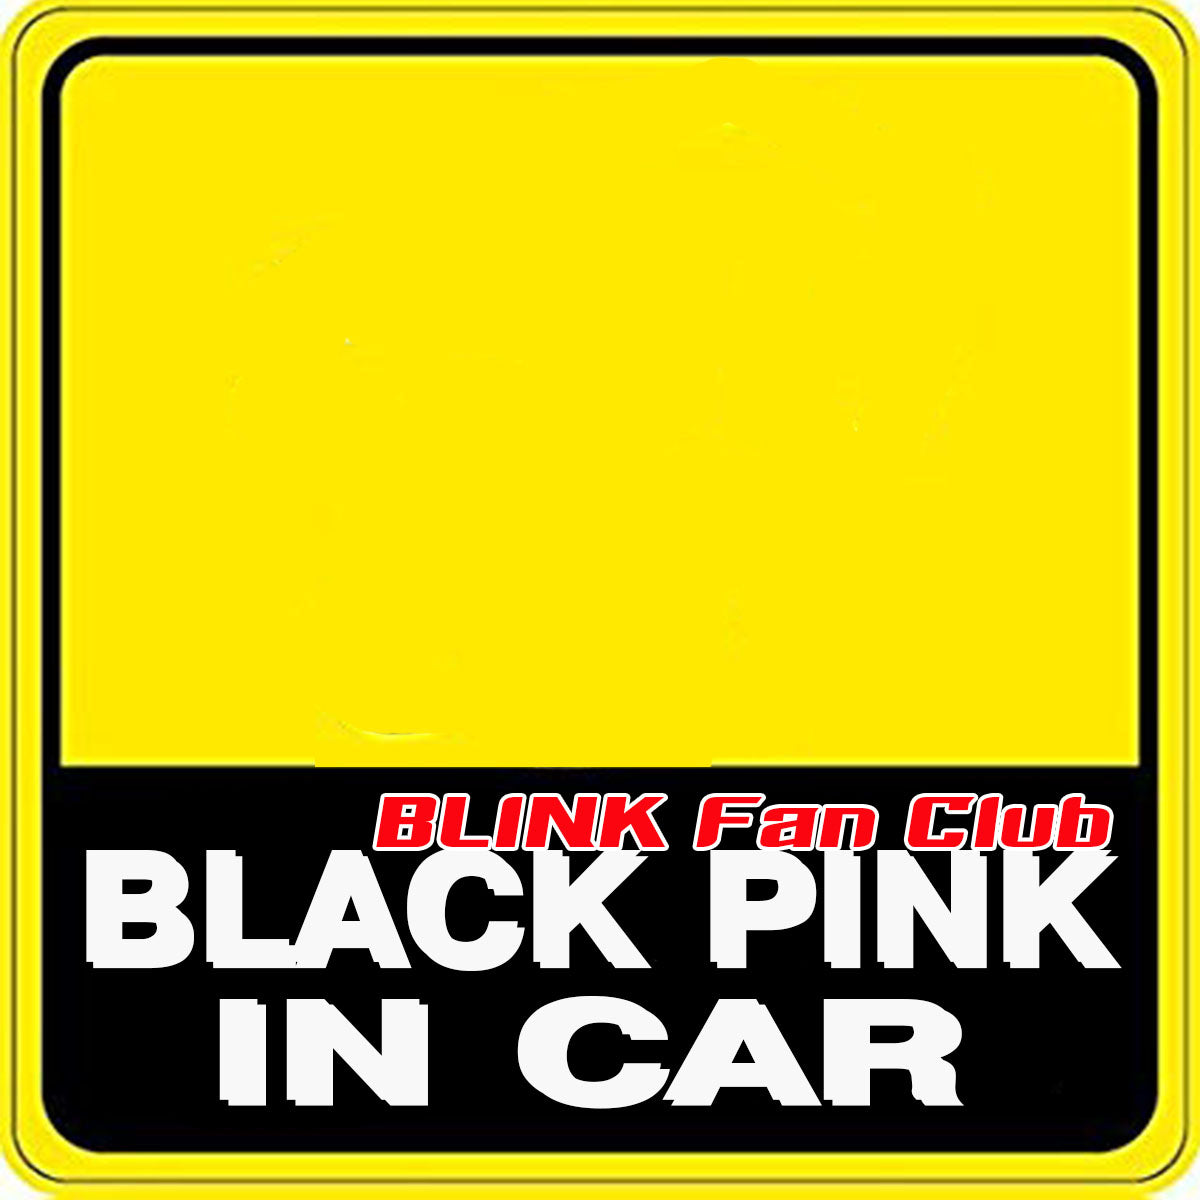 Personalised BLACK PINK LOVER ON BOARD Safety Sticker Car Vinyl Stickers Decals Accessories